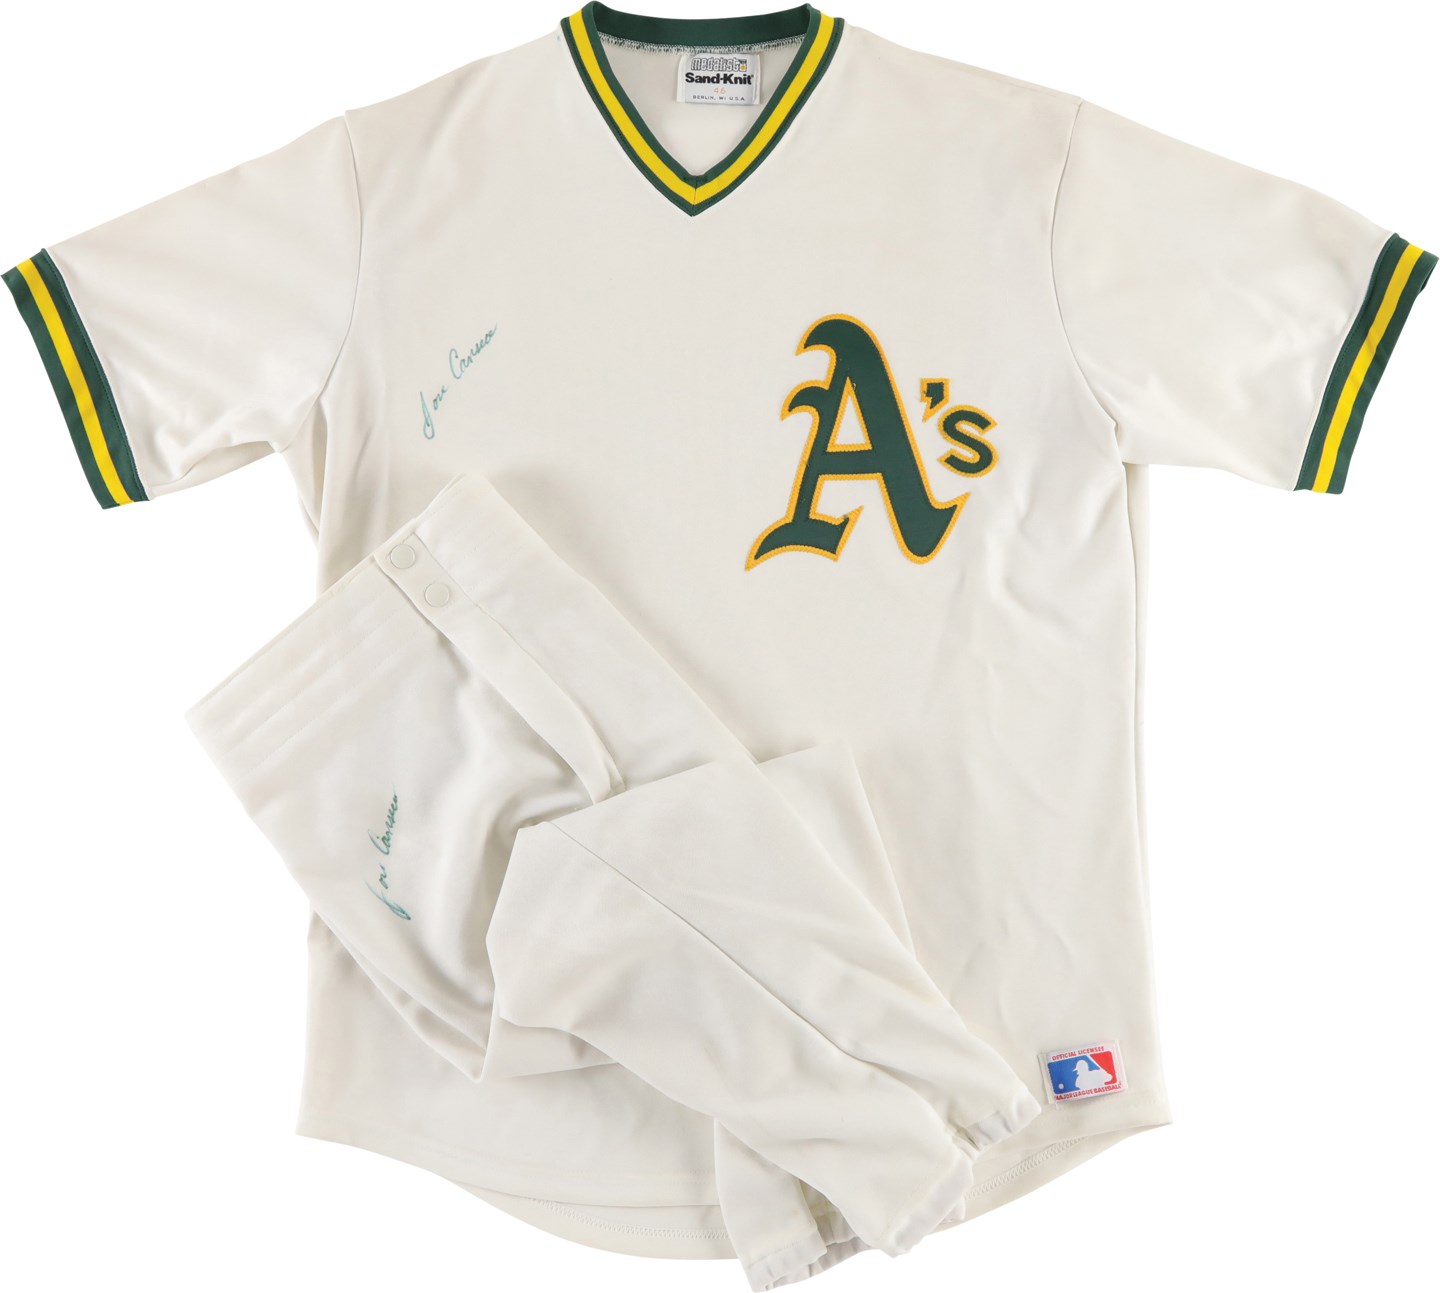 Baseball Equipment - 1986 Jose Canseco Oakland Athletics Signed Worn Uniform Attributed to First Professional Photoshoot (Canseco LOA)